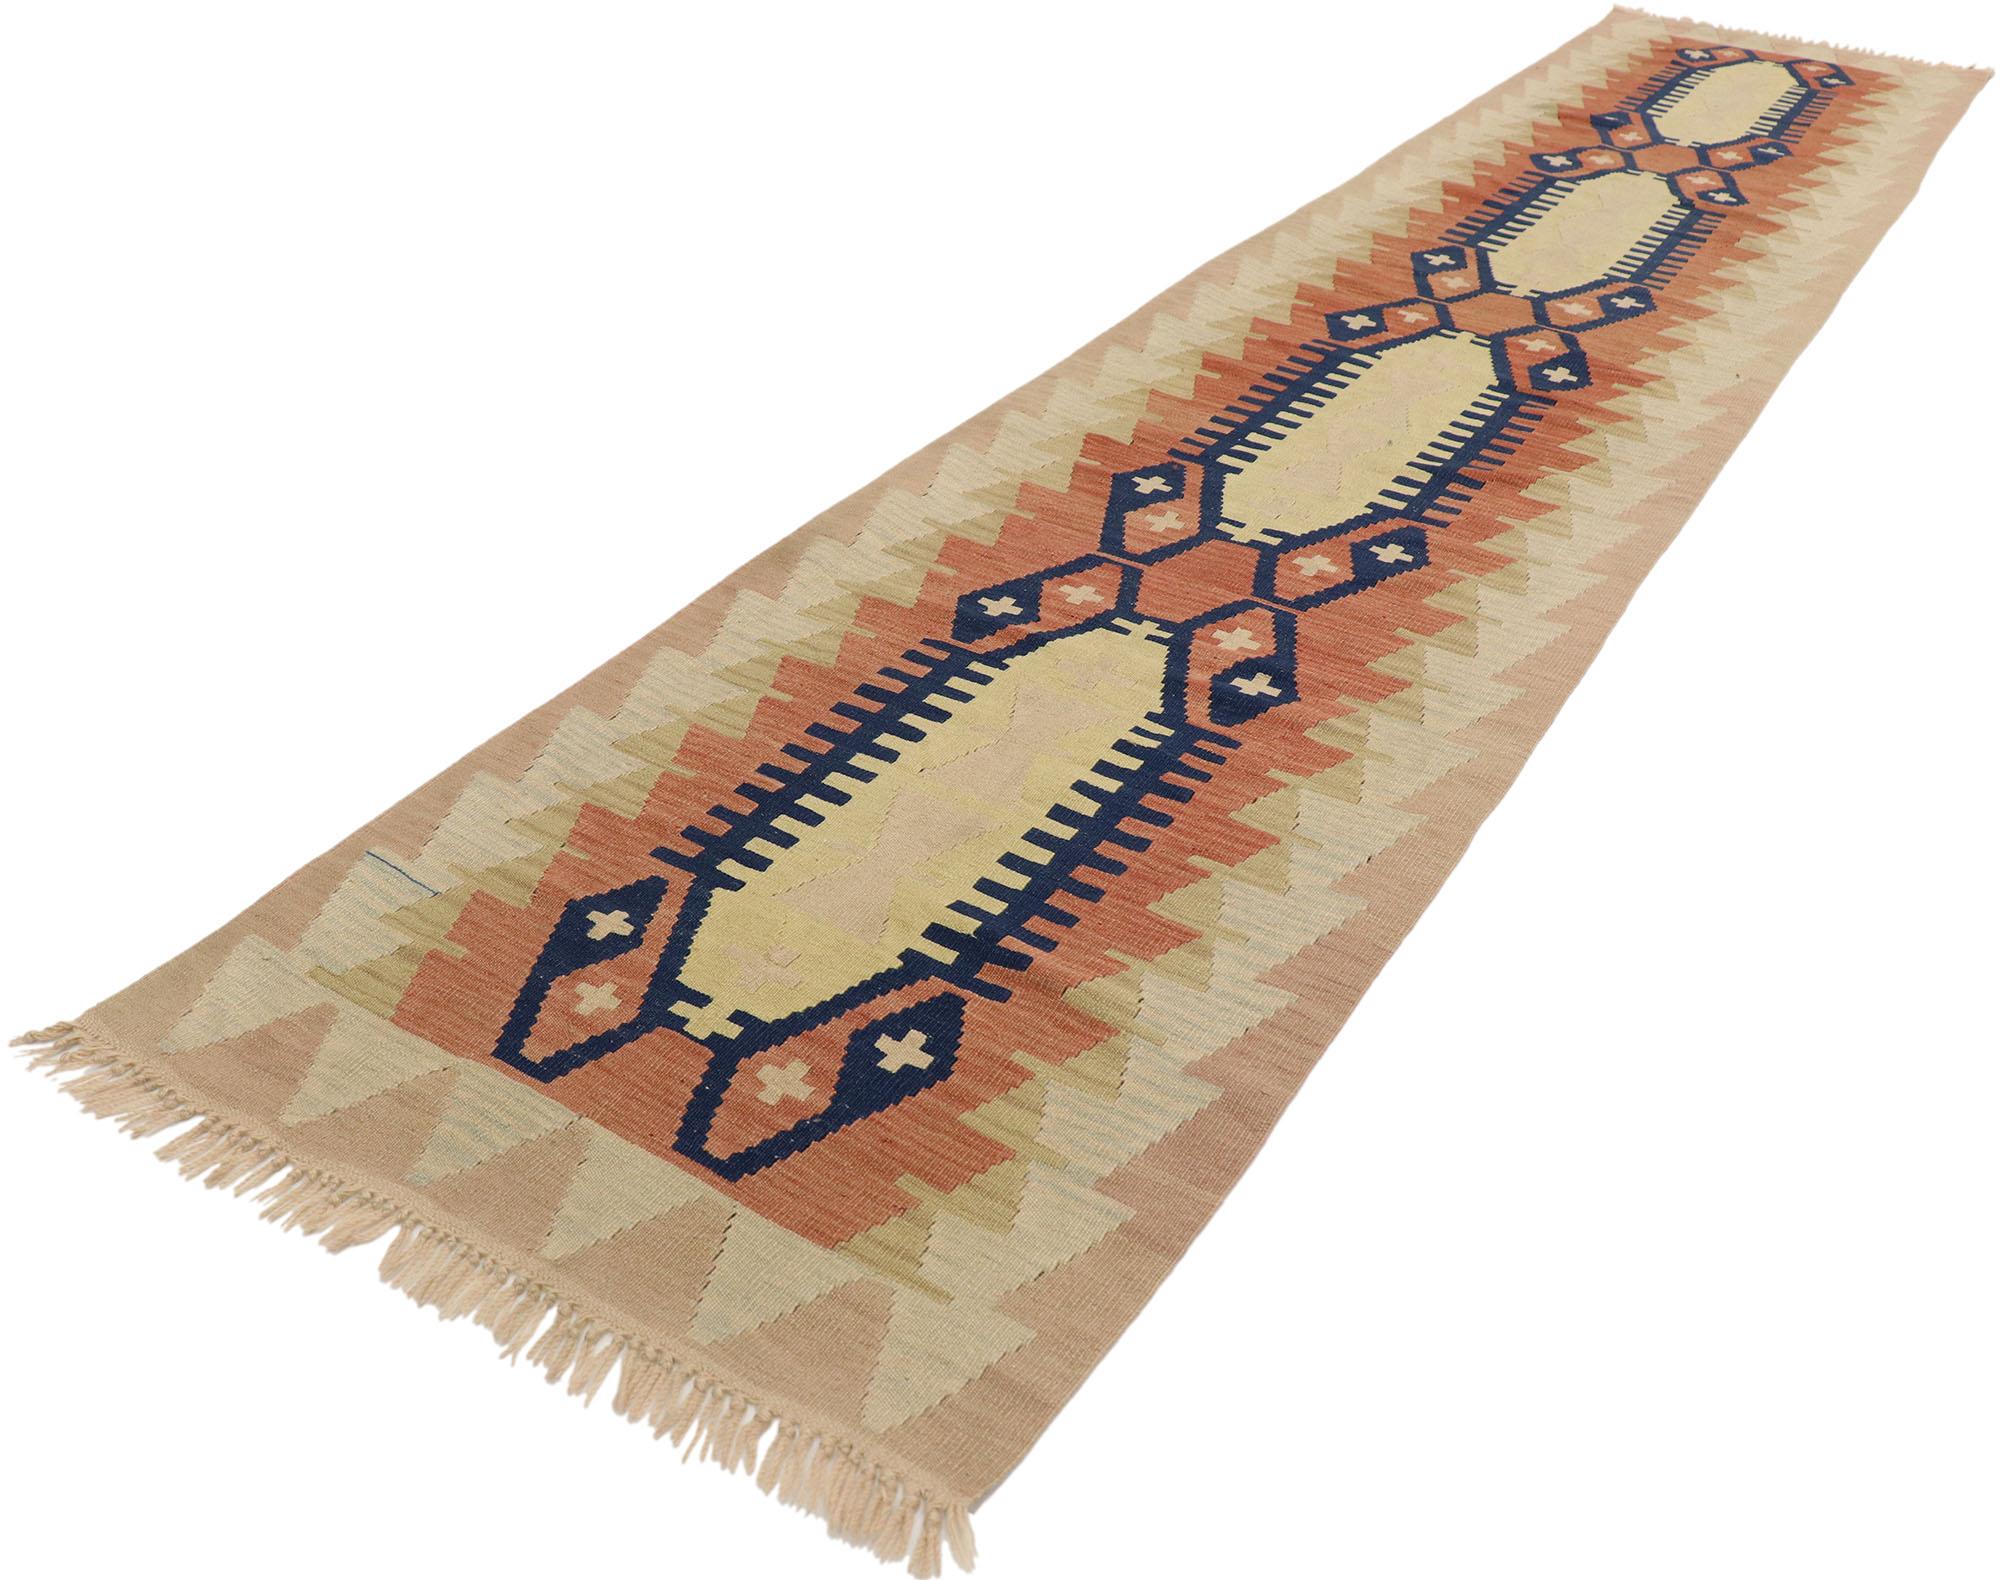 53113, vintage Turkish Kilim runner with Southwestern Desert Bohemian style. Rugged beauty and simplicity meet tribal charm with a southwest desert bohemian style in this handwoven wool vintage Turkish Kilim runner. It features an all-over geometric